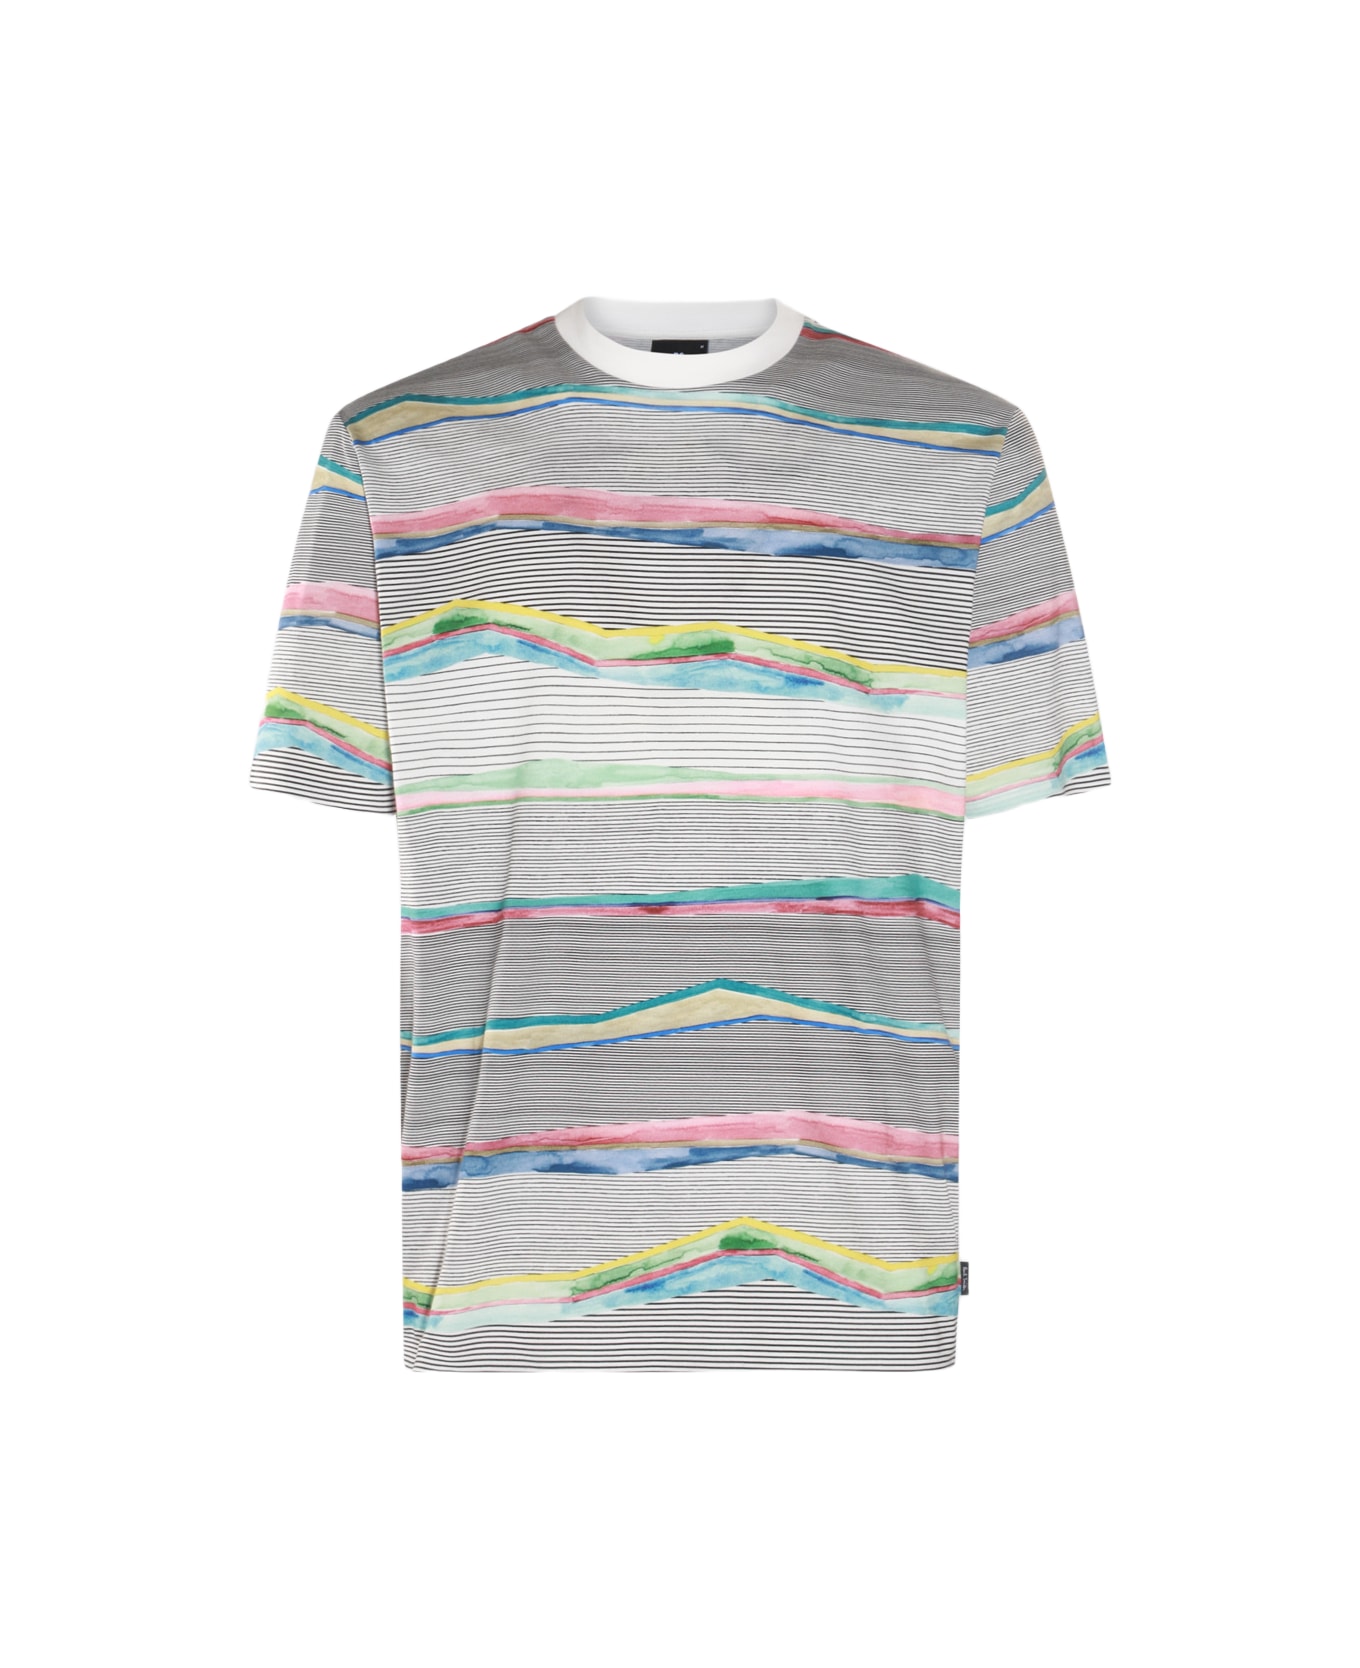 Paul Smith Grey Multicolour Cotton T-shirt - Red